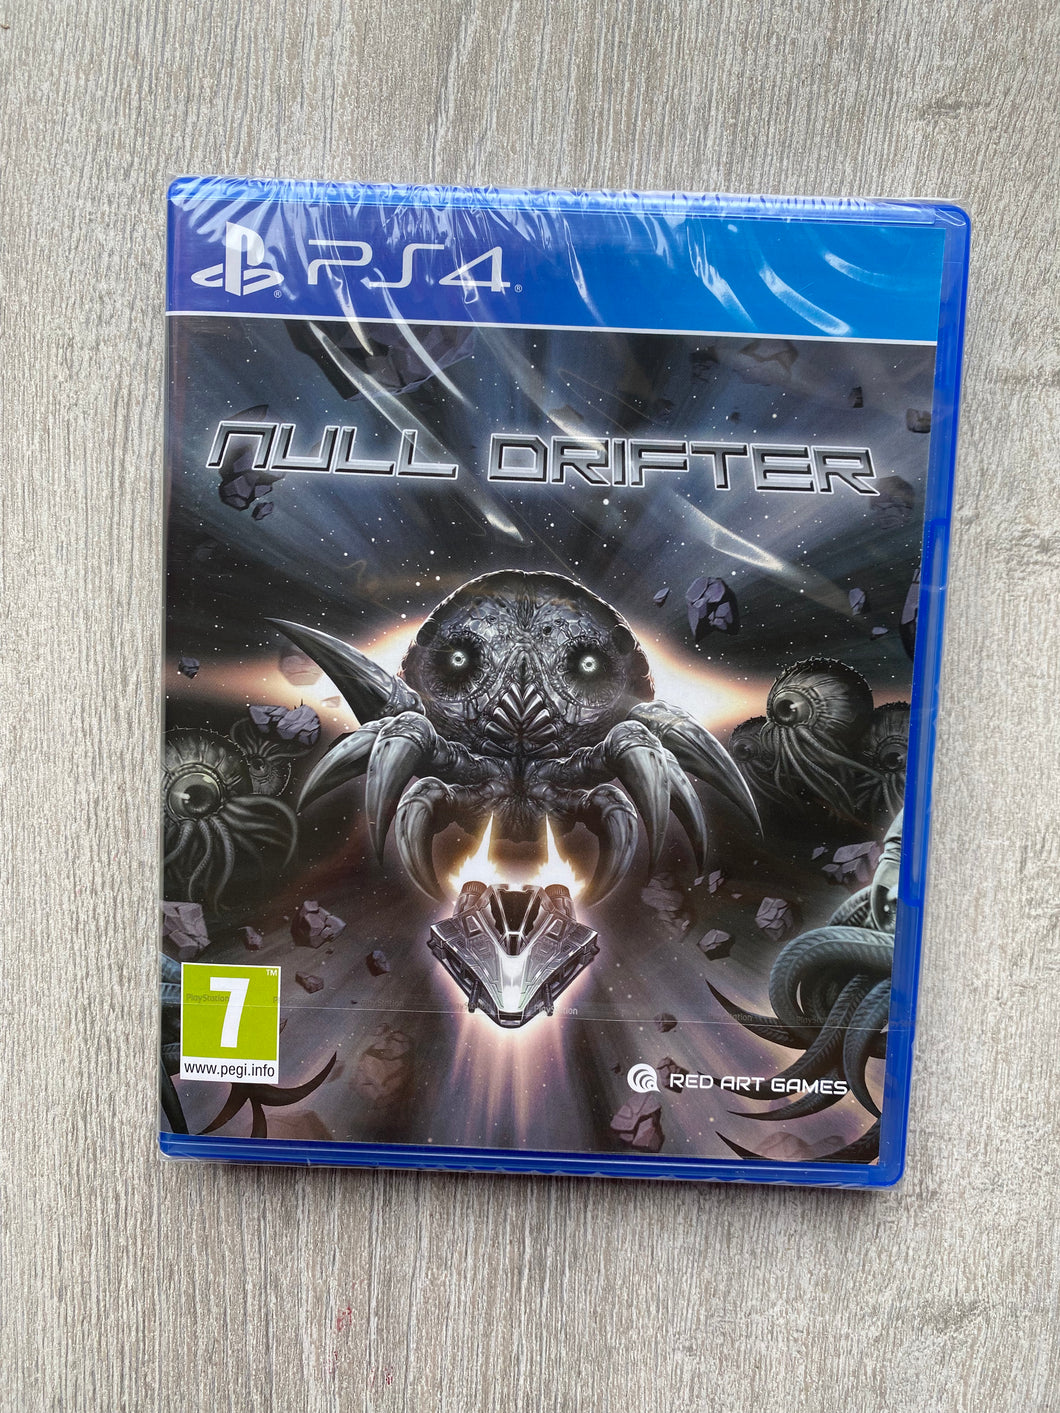 Null drifter / Red art games / Ps4 / 999 copies